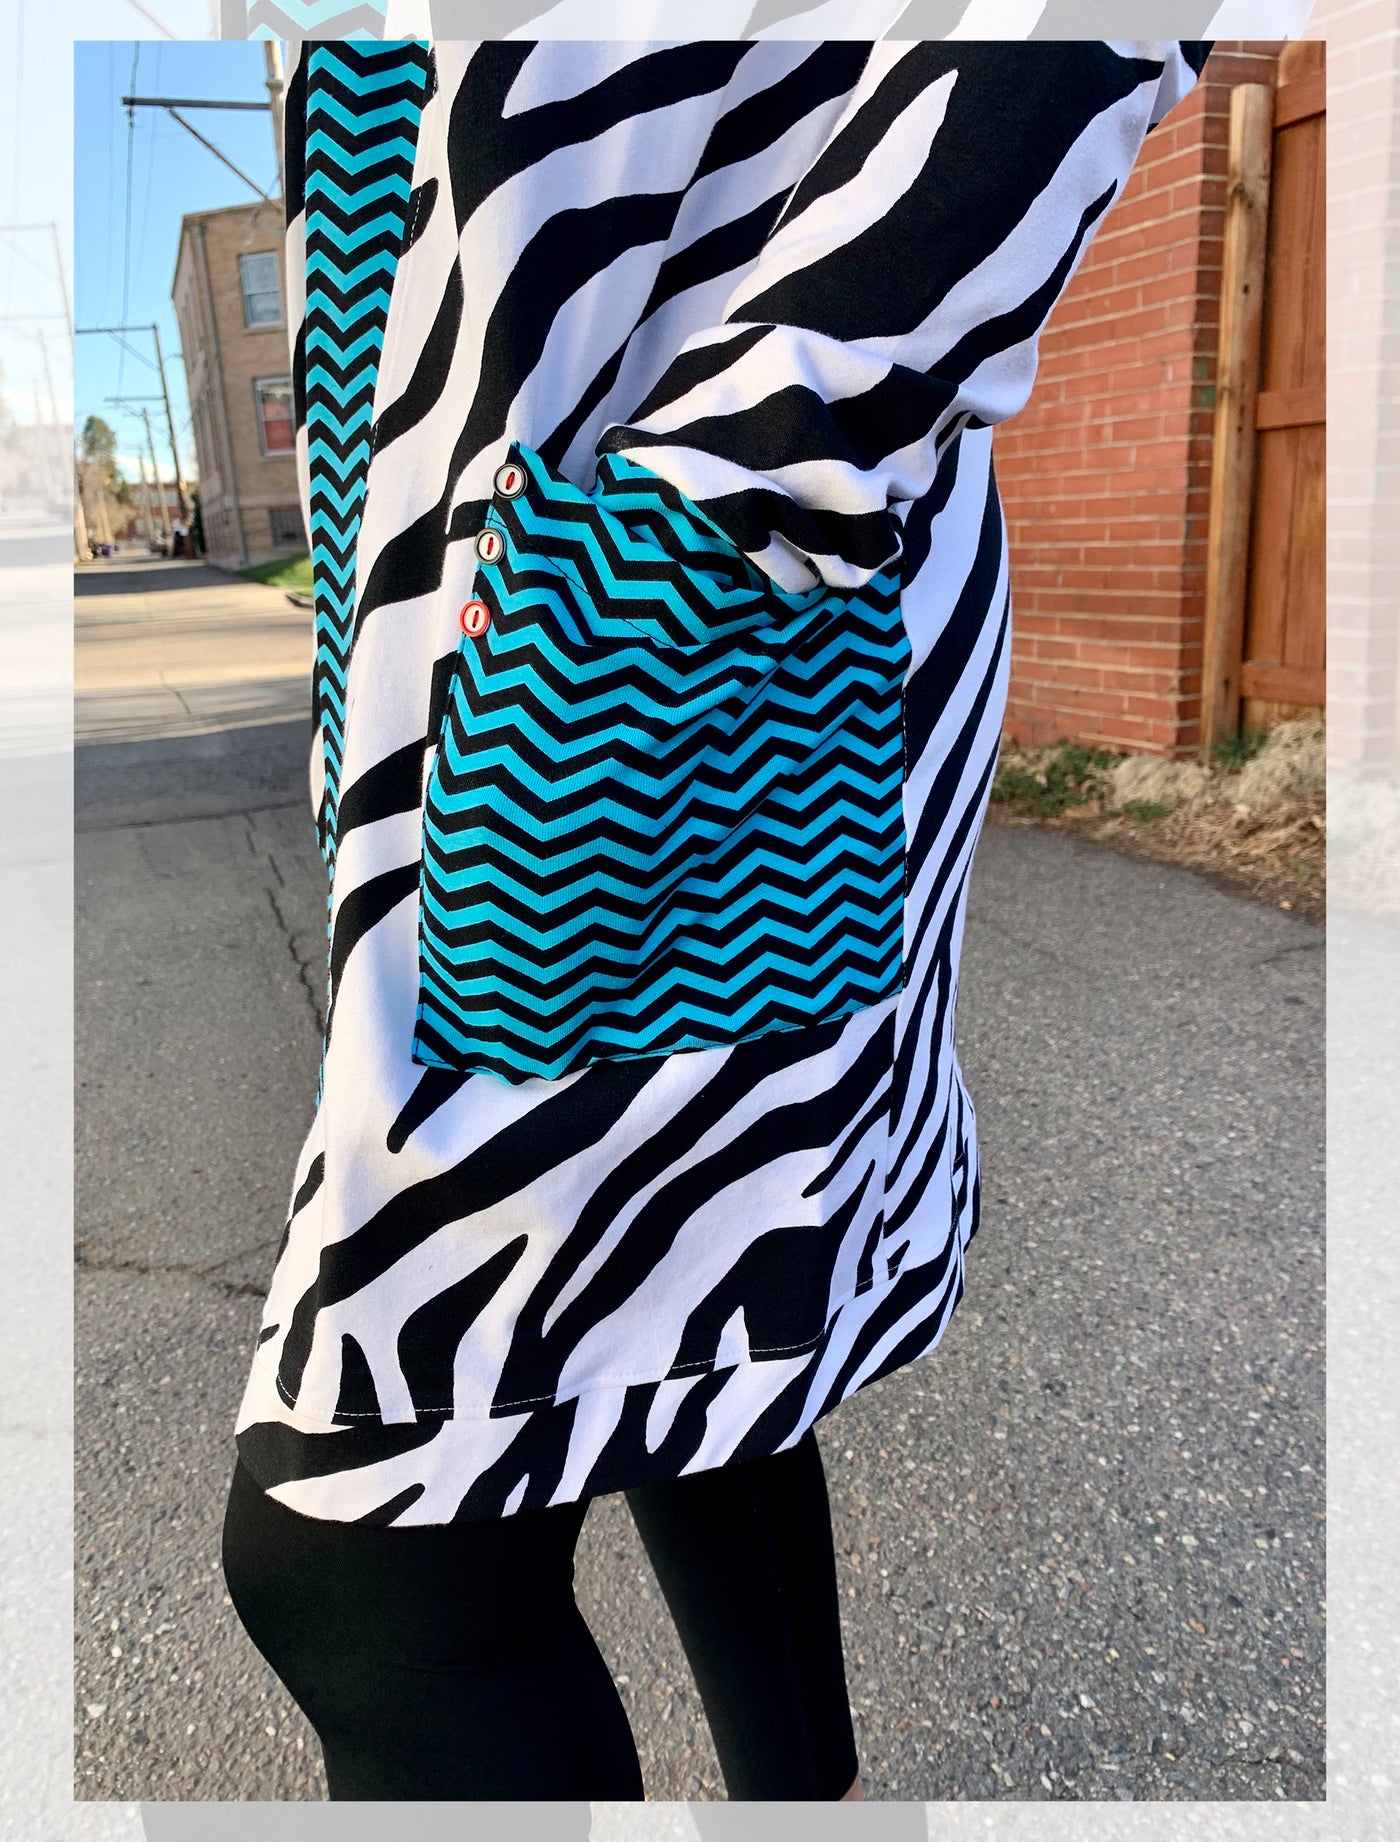 Model stands outside wearing a knee length cardigan with electric blue and navy chevron edging and large, front pockets. The body of the cardigan is black and white zebra pattern. She has paired it with black leggings. The photo is a close up of her hand in the pocket.